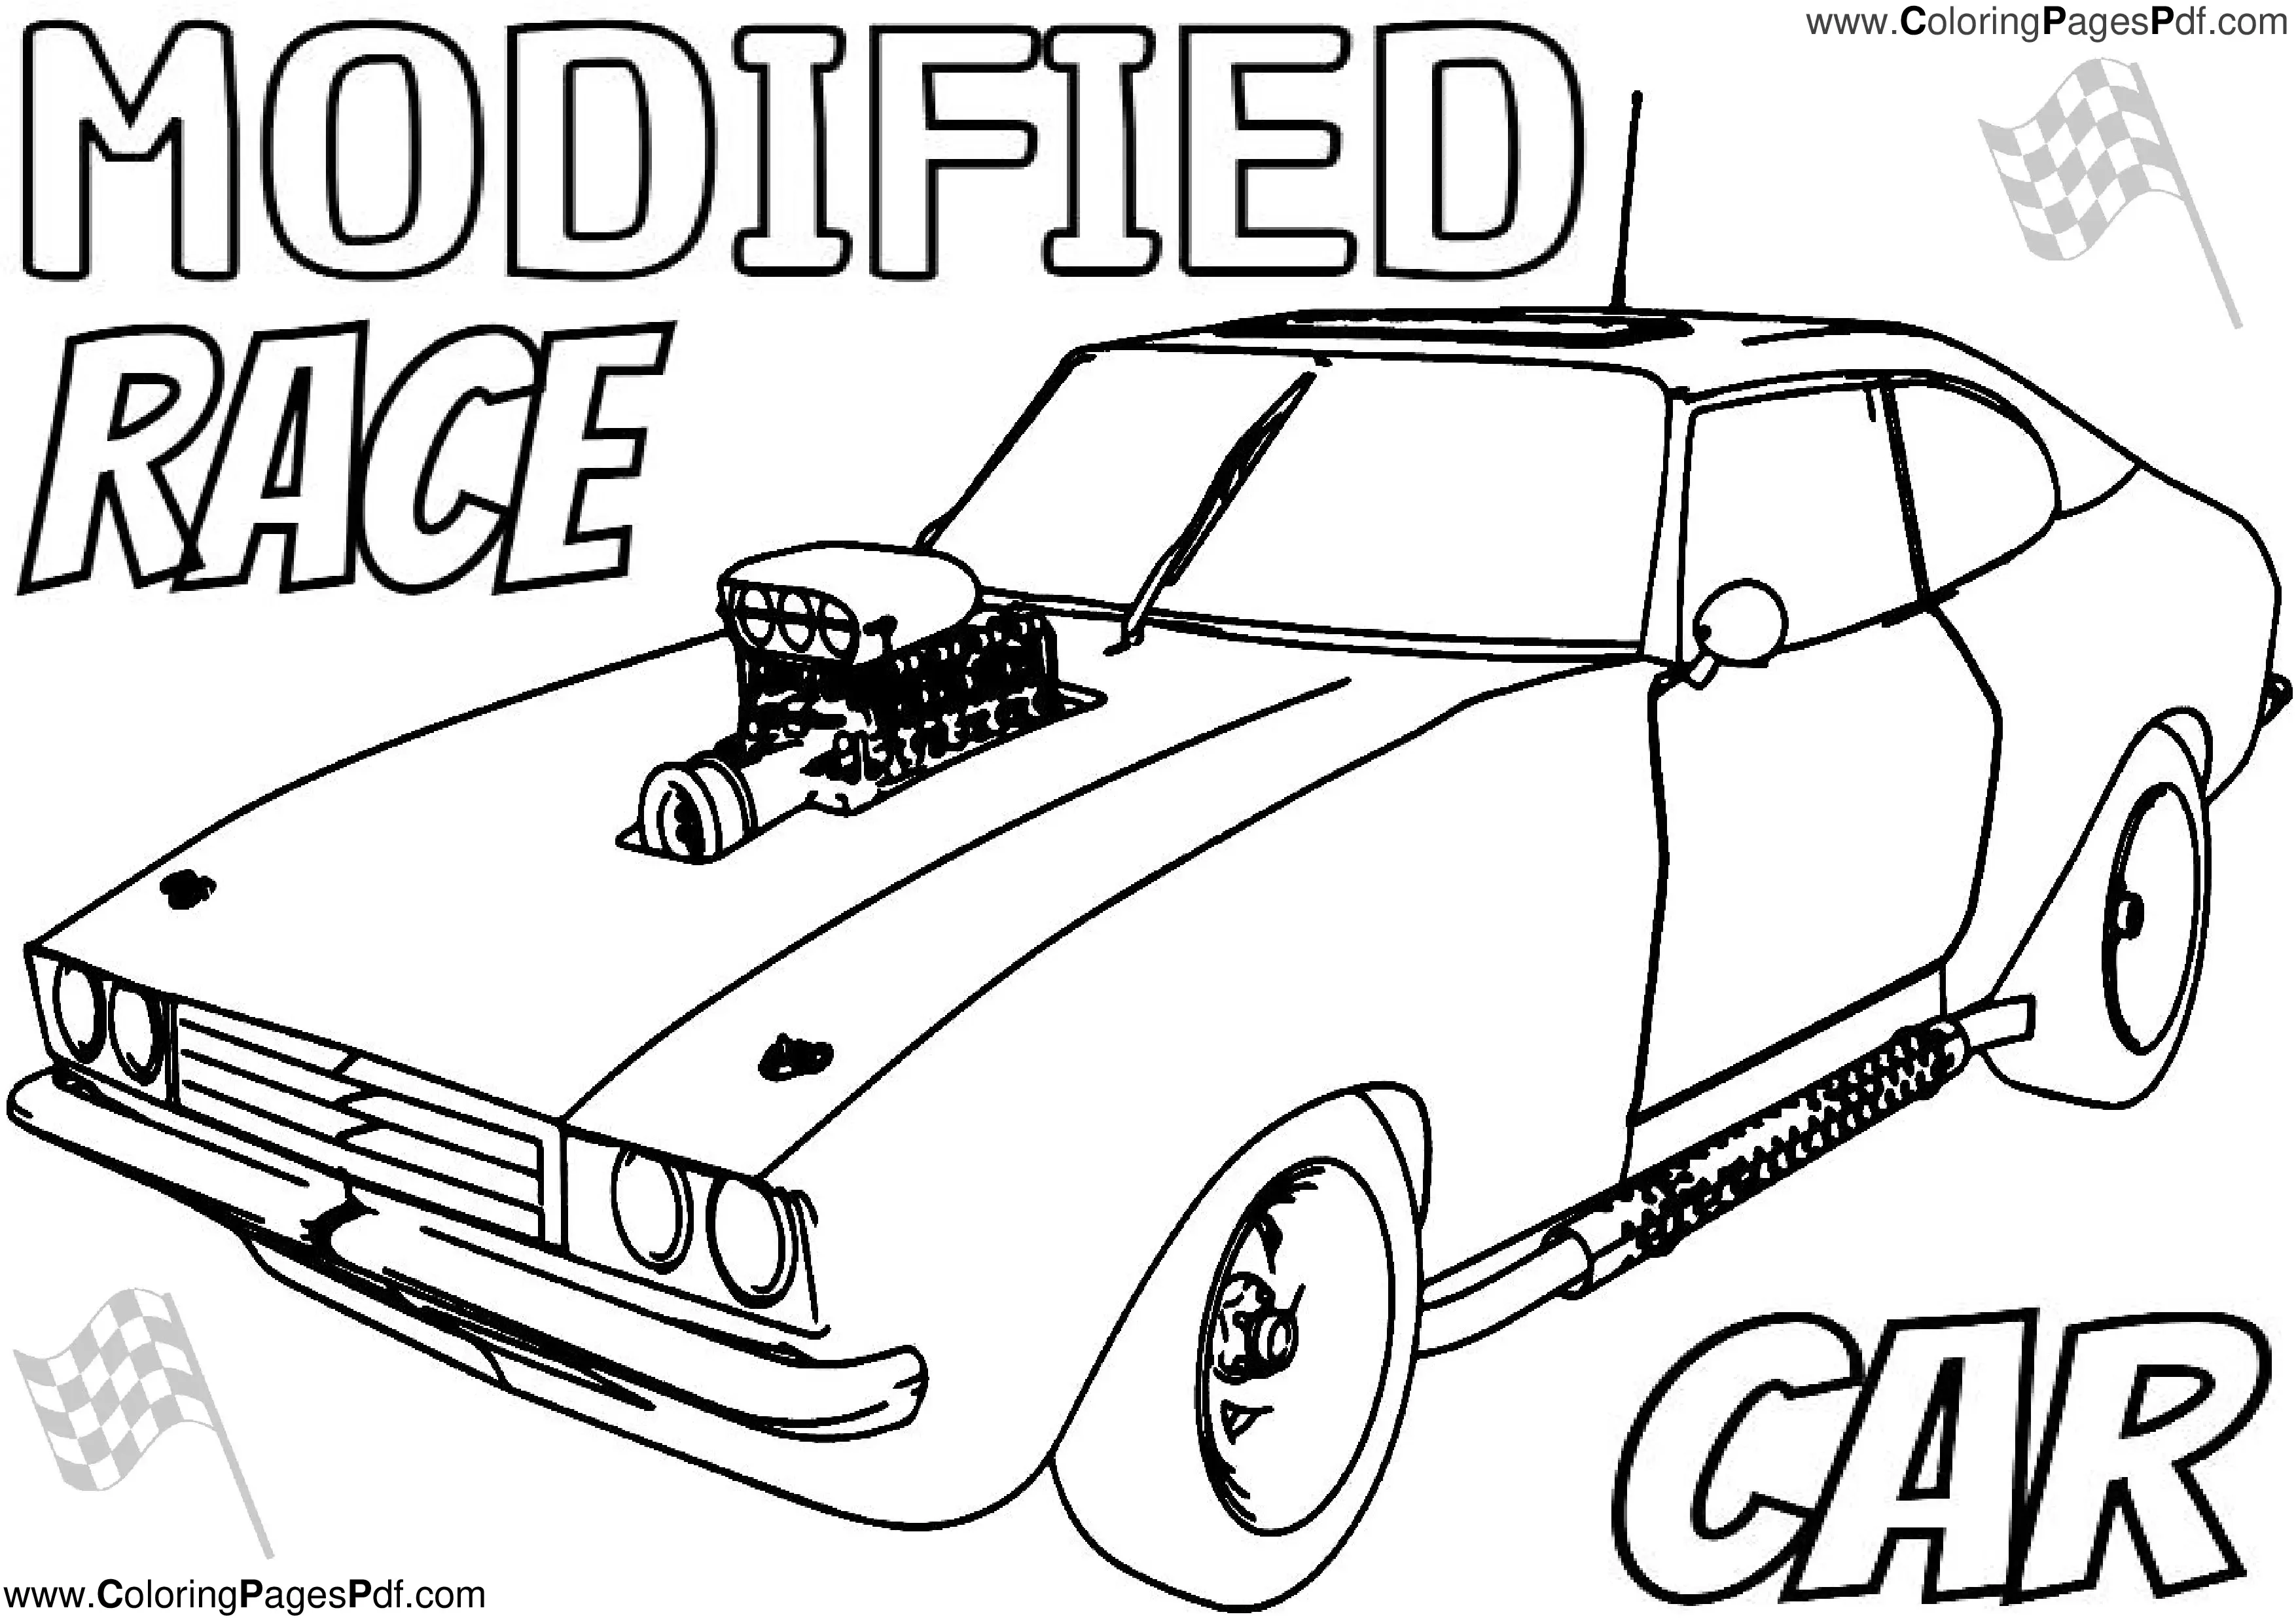 Modified race car coloring pages